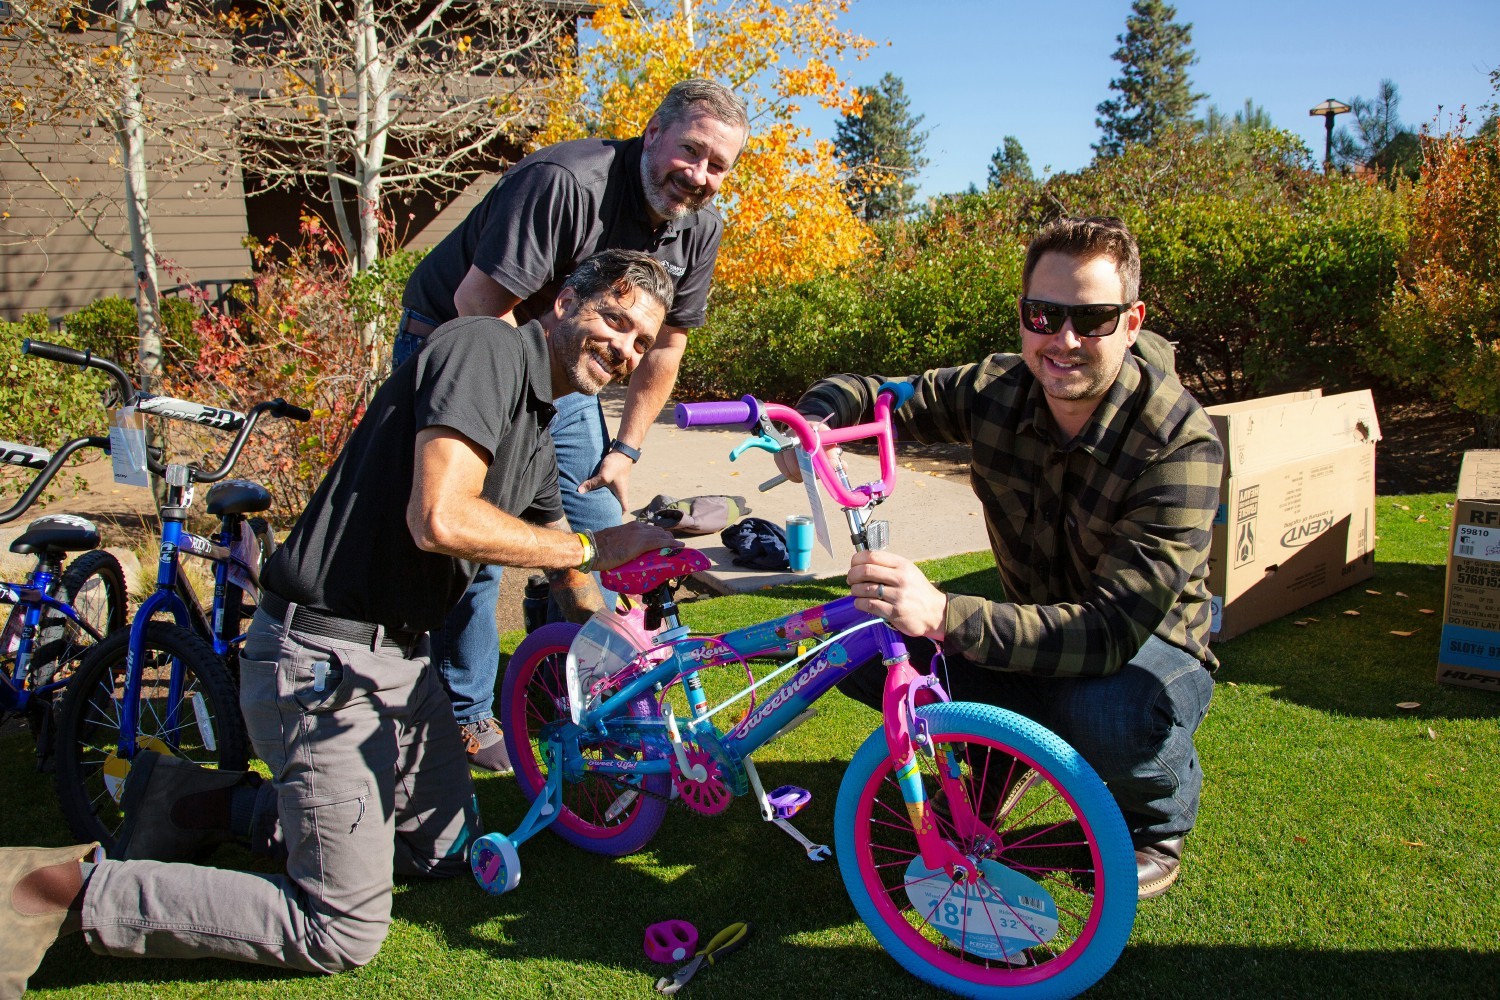 Team members assembled 23 bikes that were donated to Every Child Central Oregon, serving children in foster care.